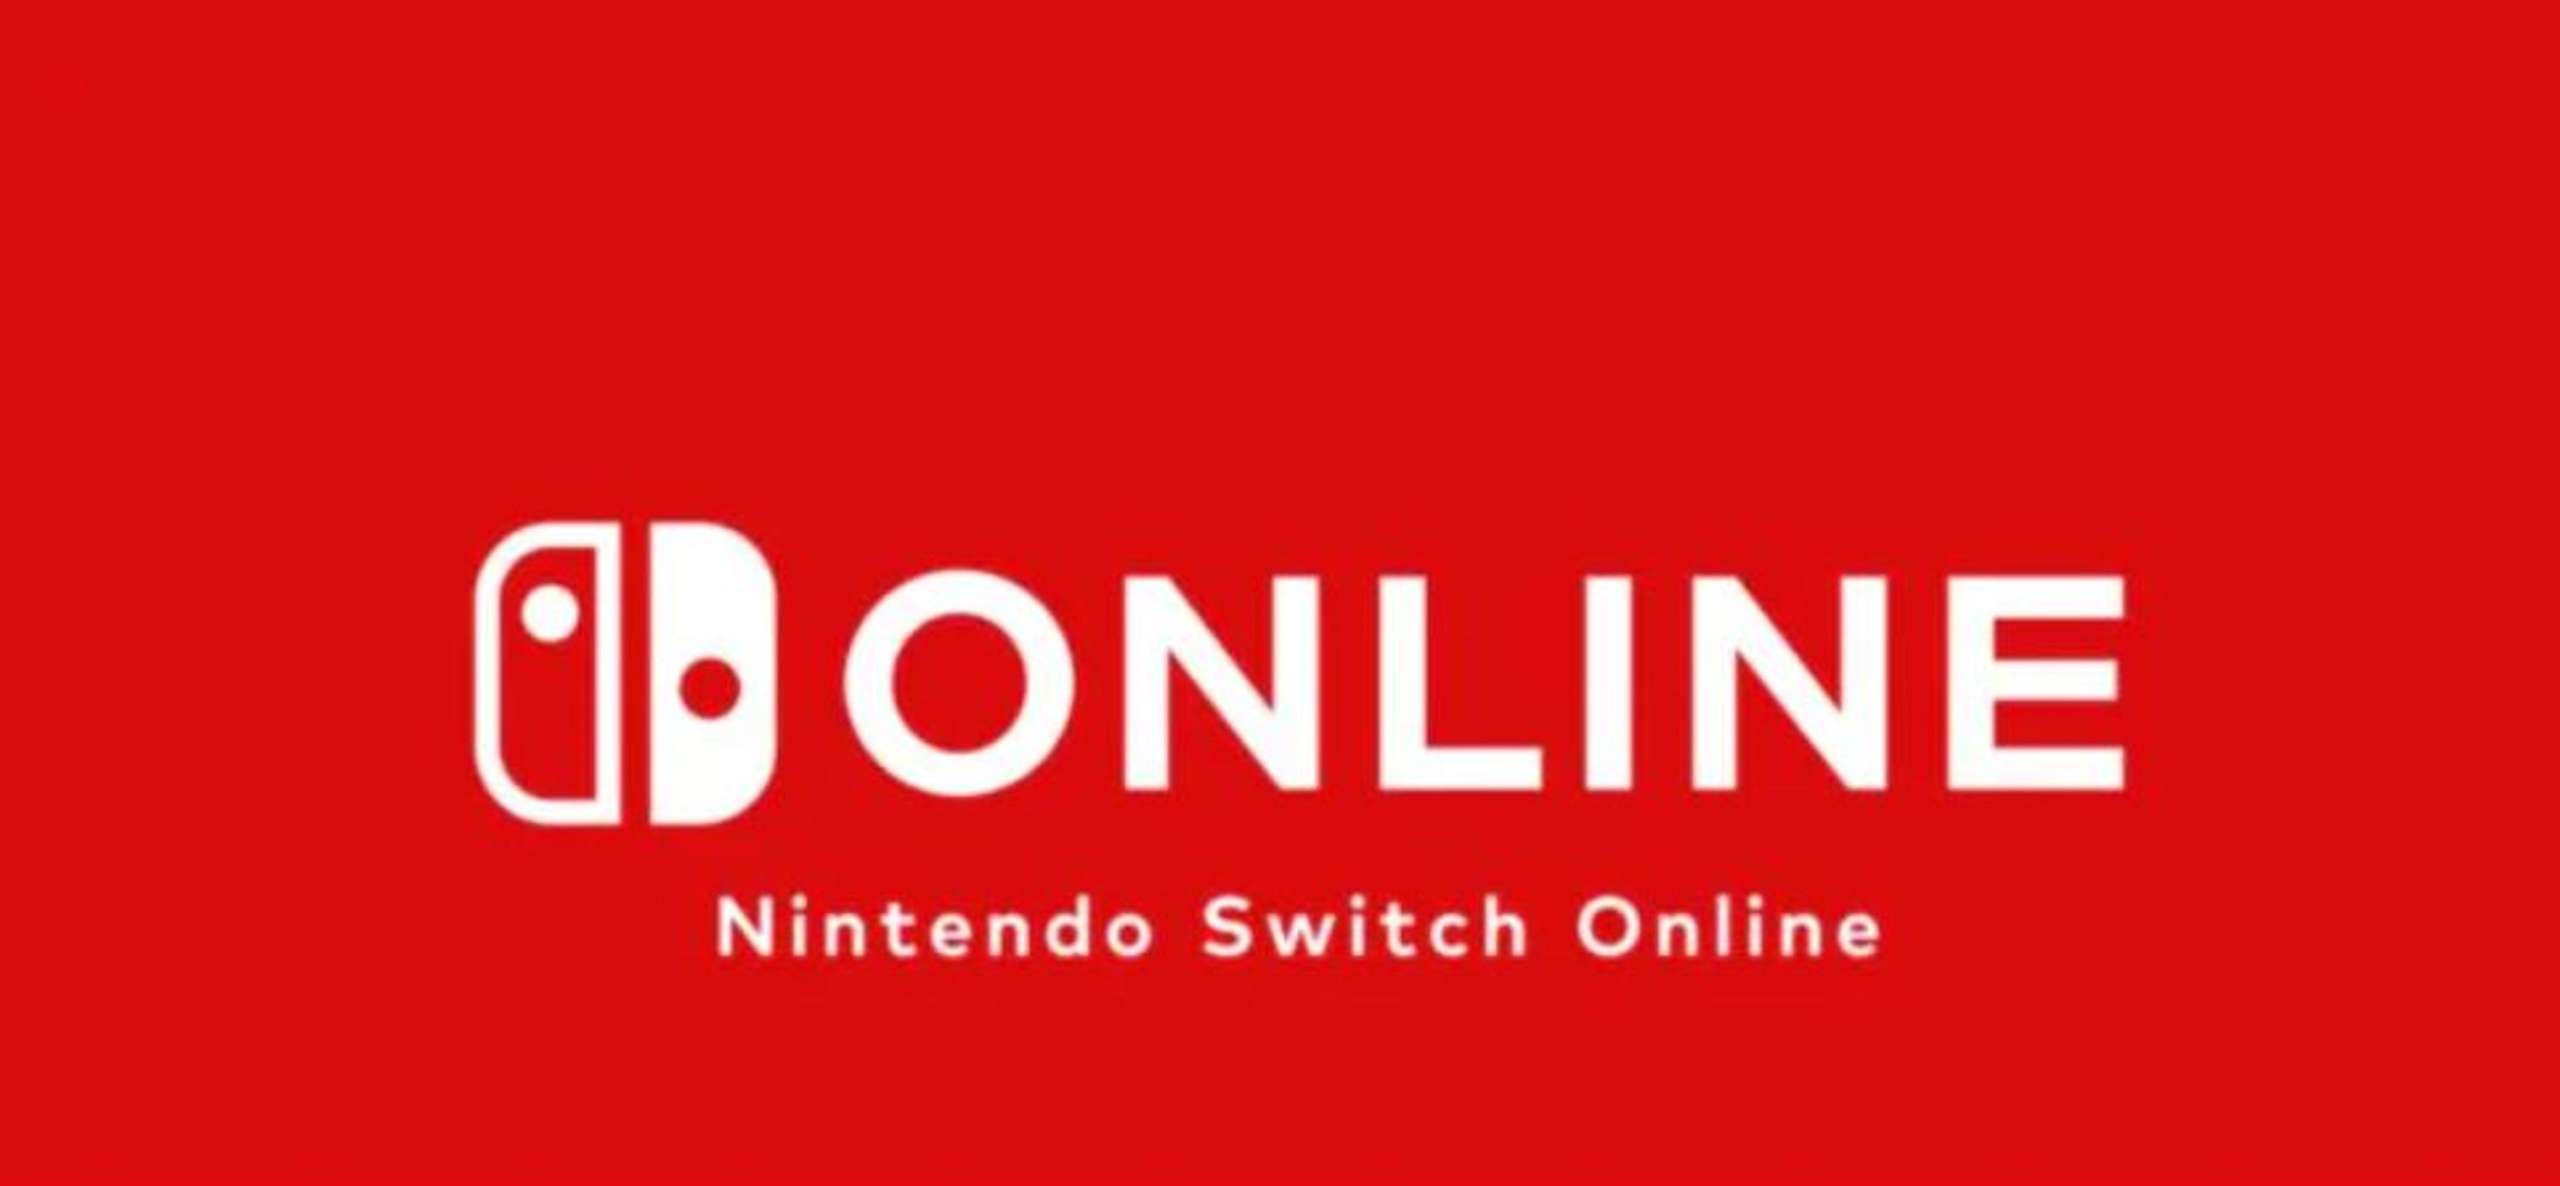 Nintendo has released a new update to the Switch Online app that adds a fresh coat of paint along with new features and quality-of-life improvements